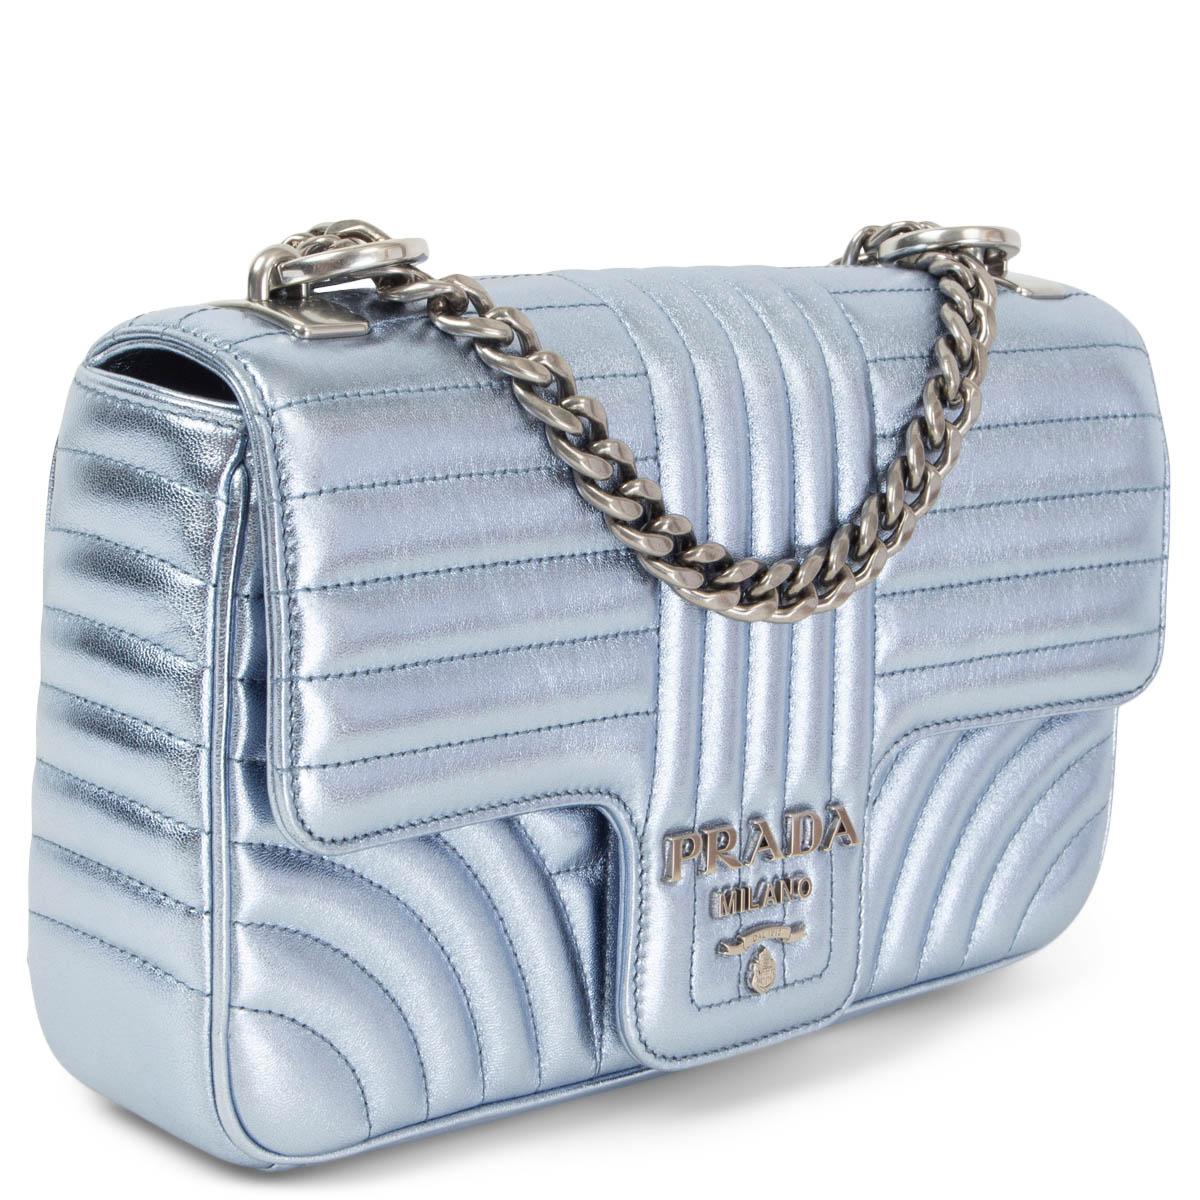 100% authentic Prada Diagramme Medium crossbody bag in quilted meatllic light blue smooth leather featuring silver-tone hardware. Comes with a sliding chain shoulder strap with shoulder pad. Opens with a magentic button under the flap and is lined